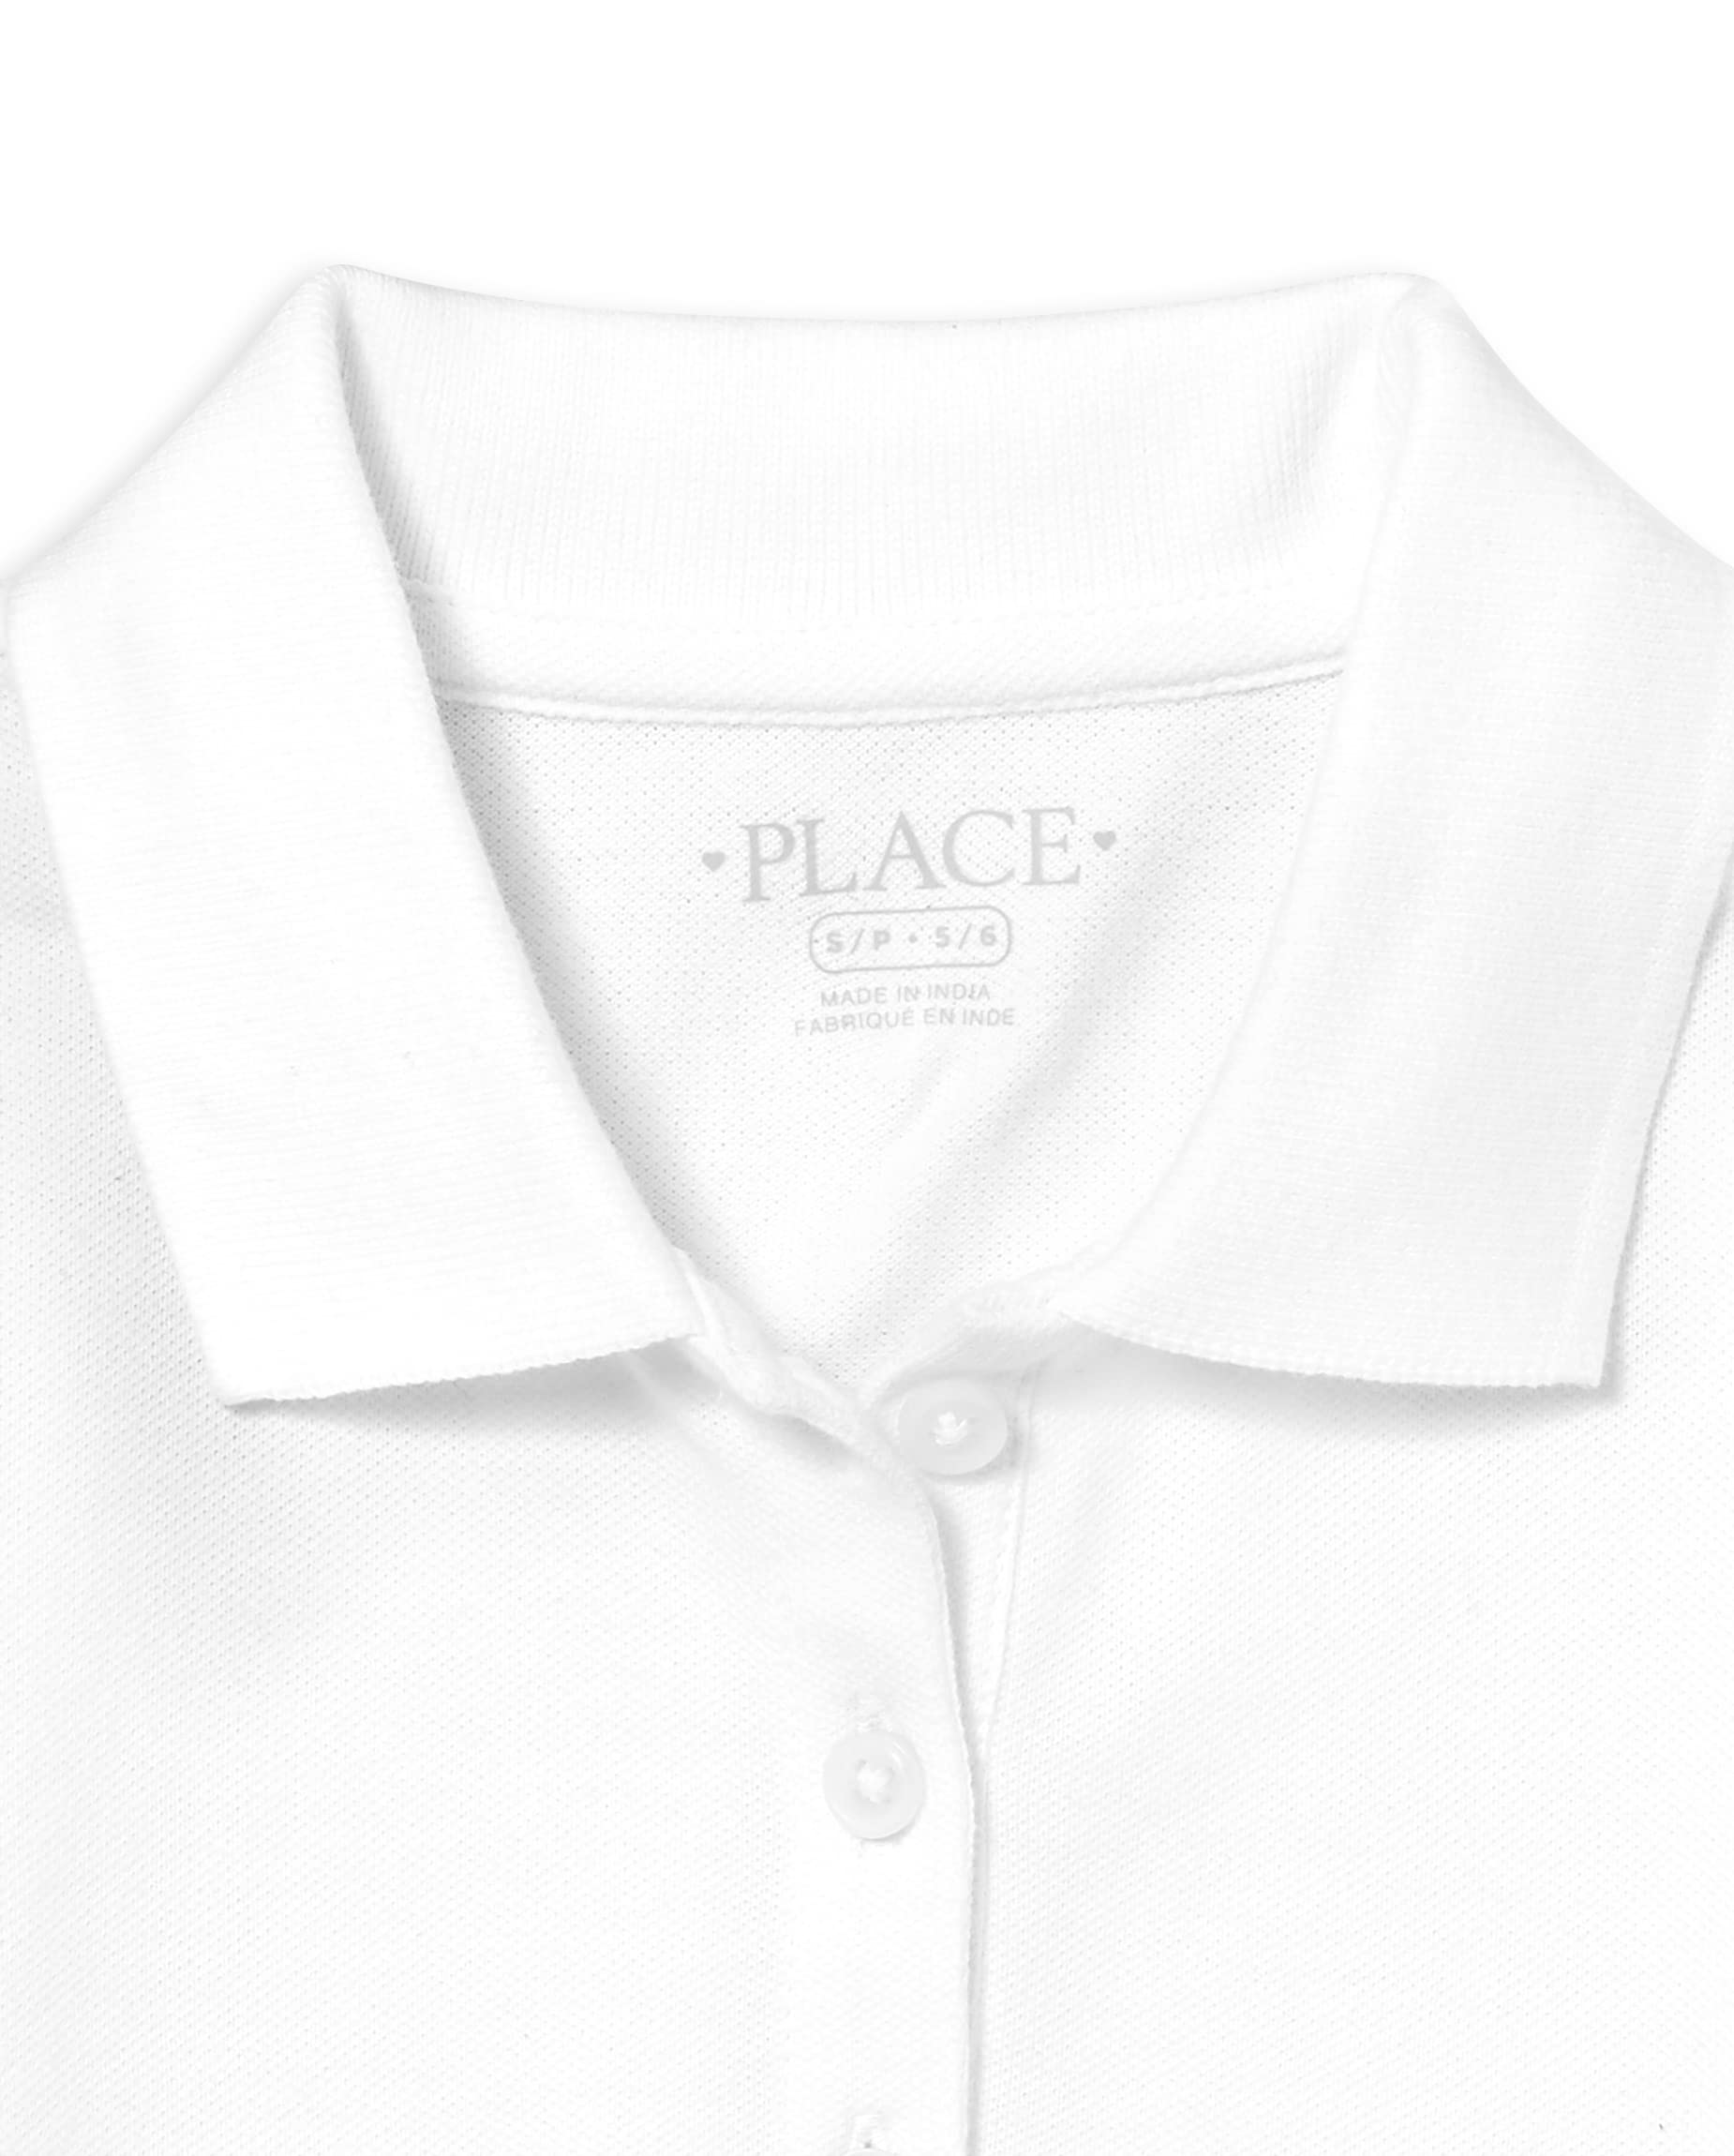 The Children's Place Girls' Long Sleeve Pique Polo